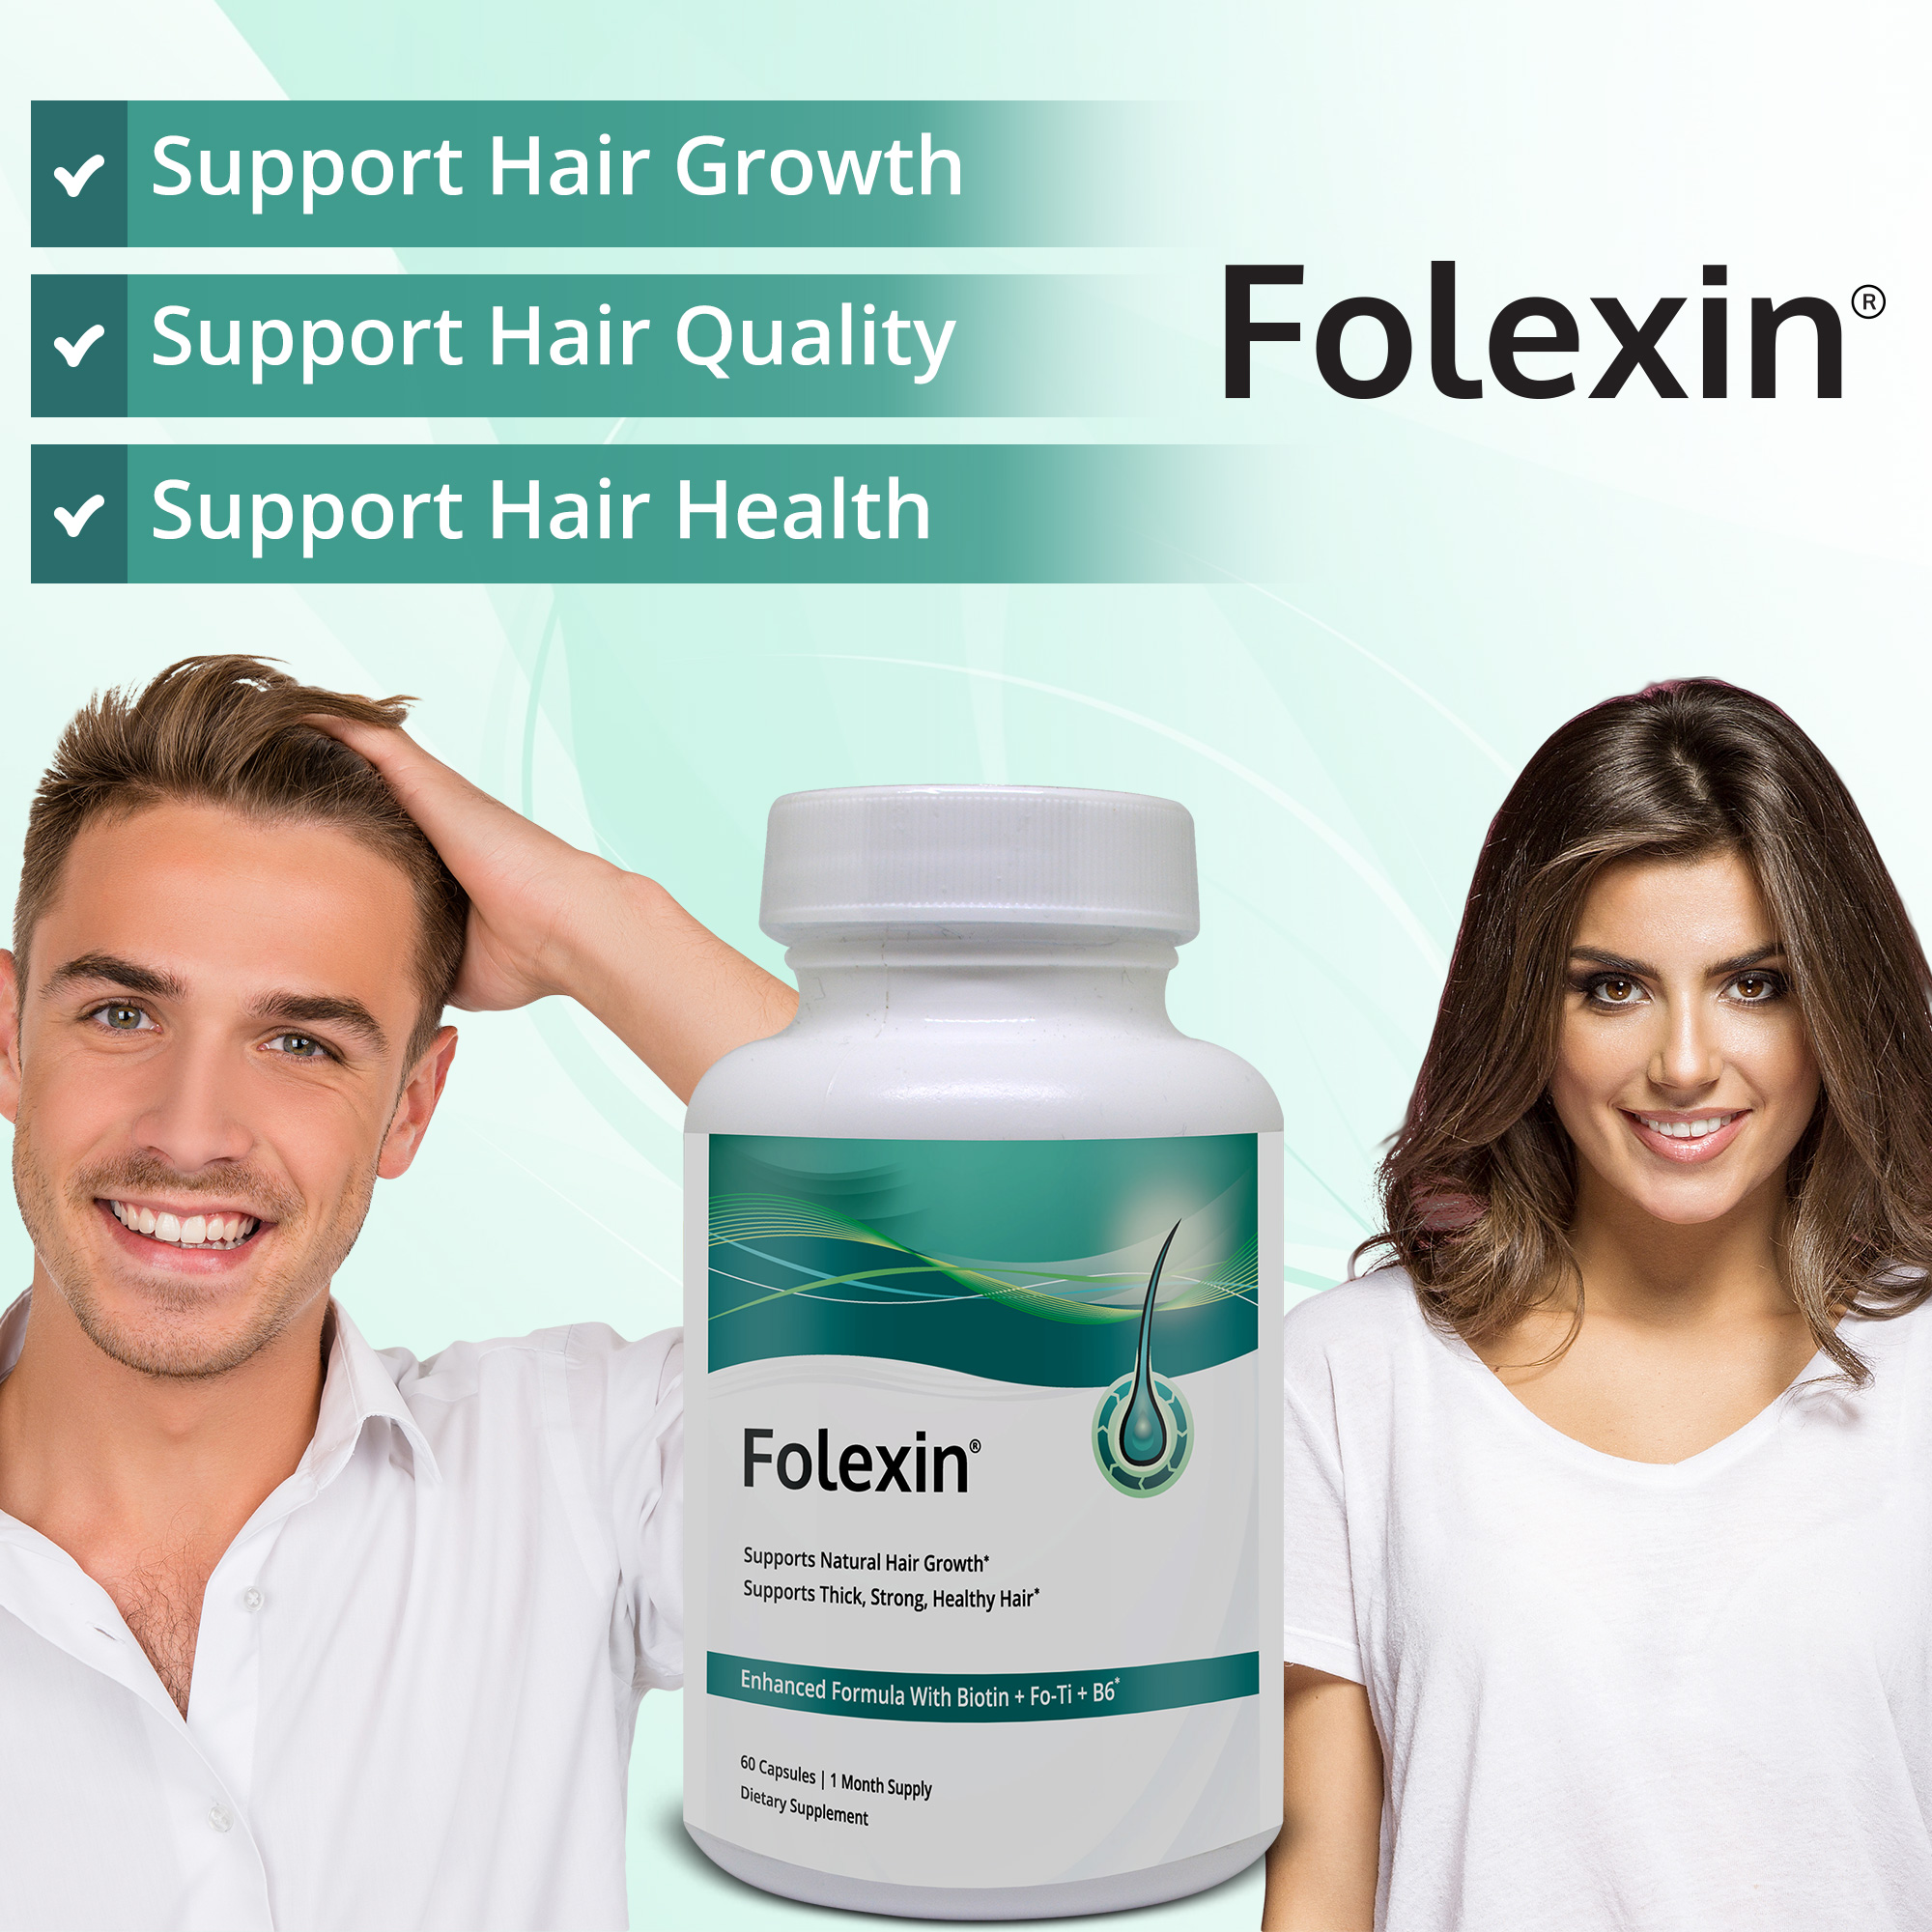 Folexin Supports Natural Hair Growth